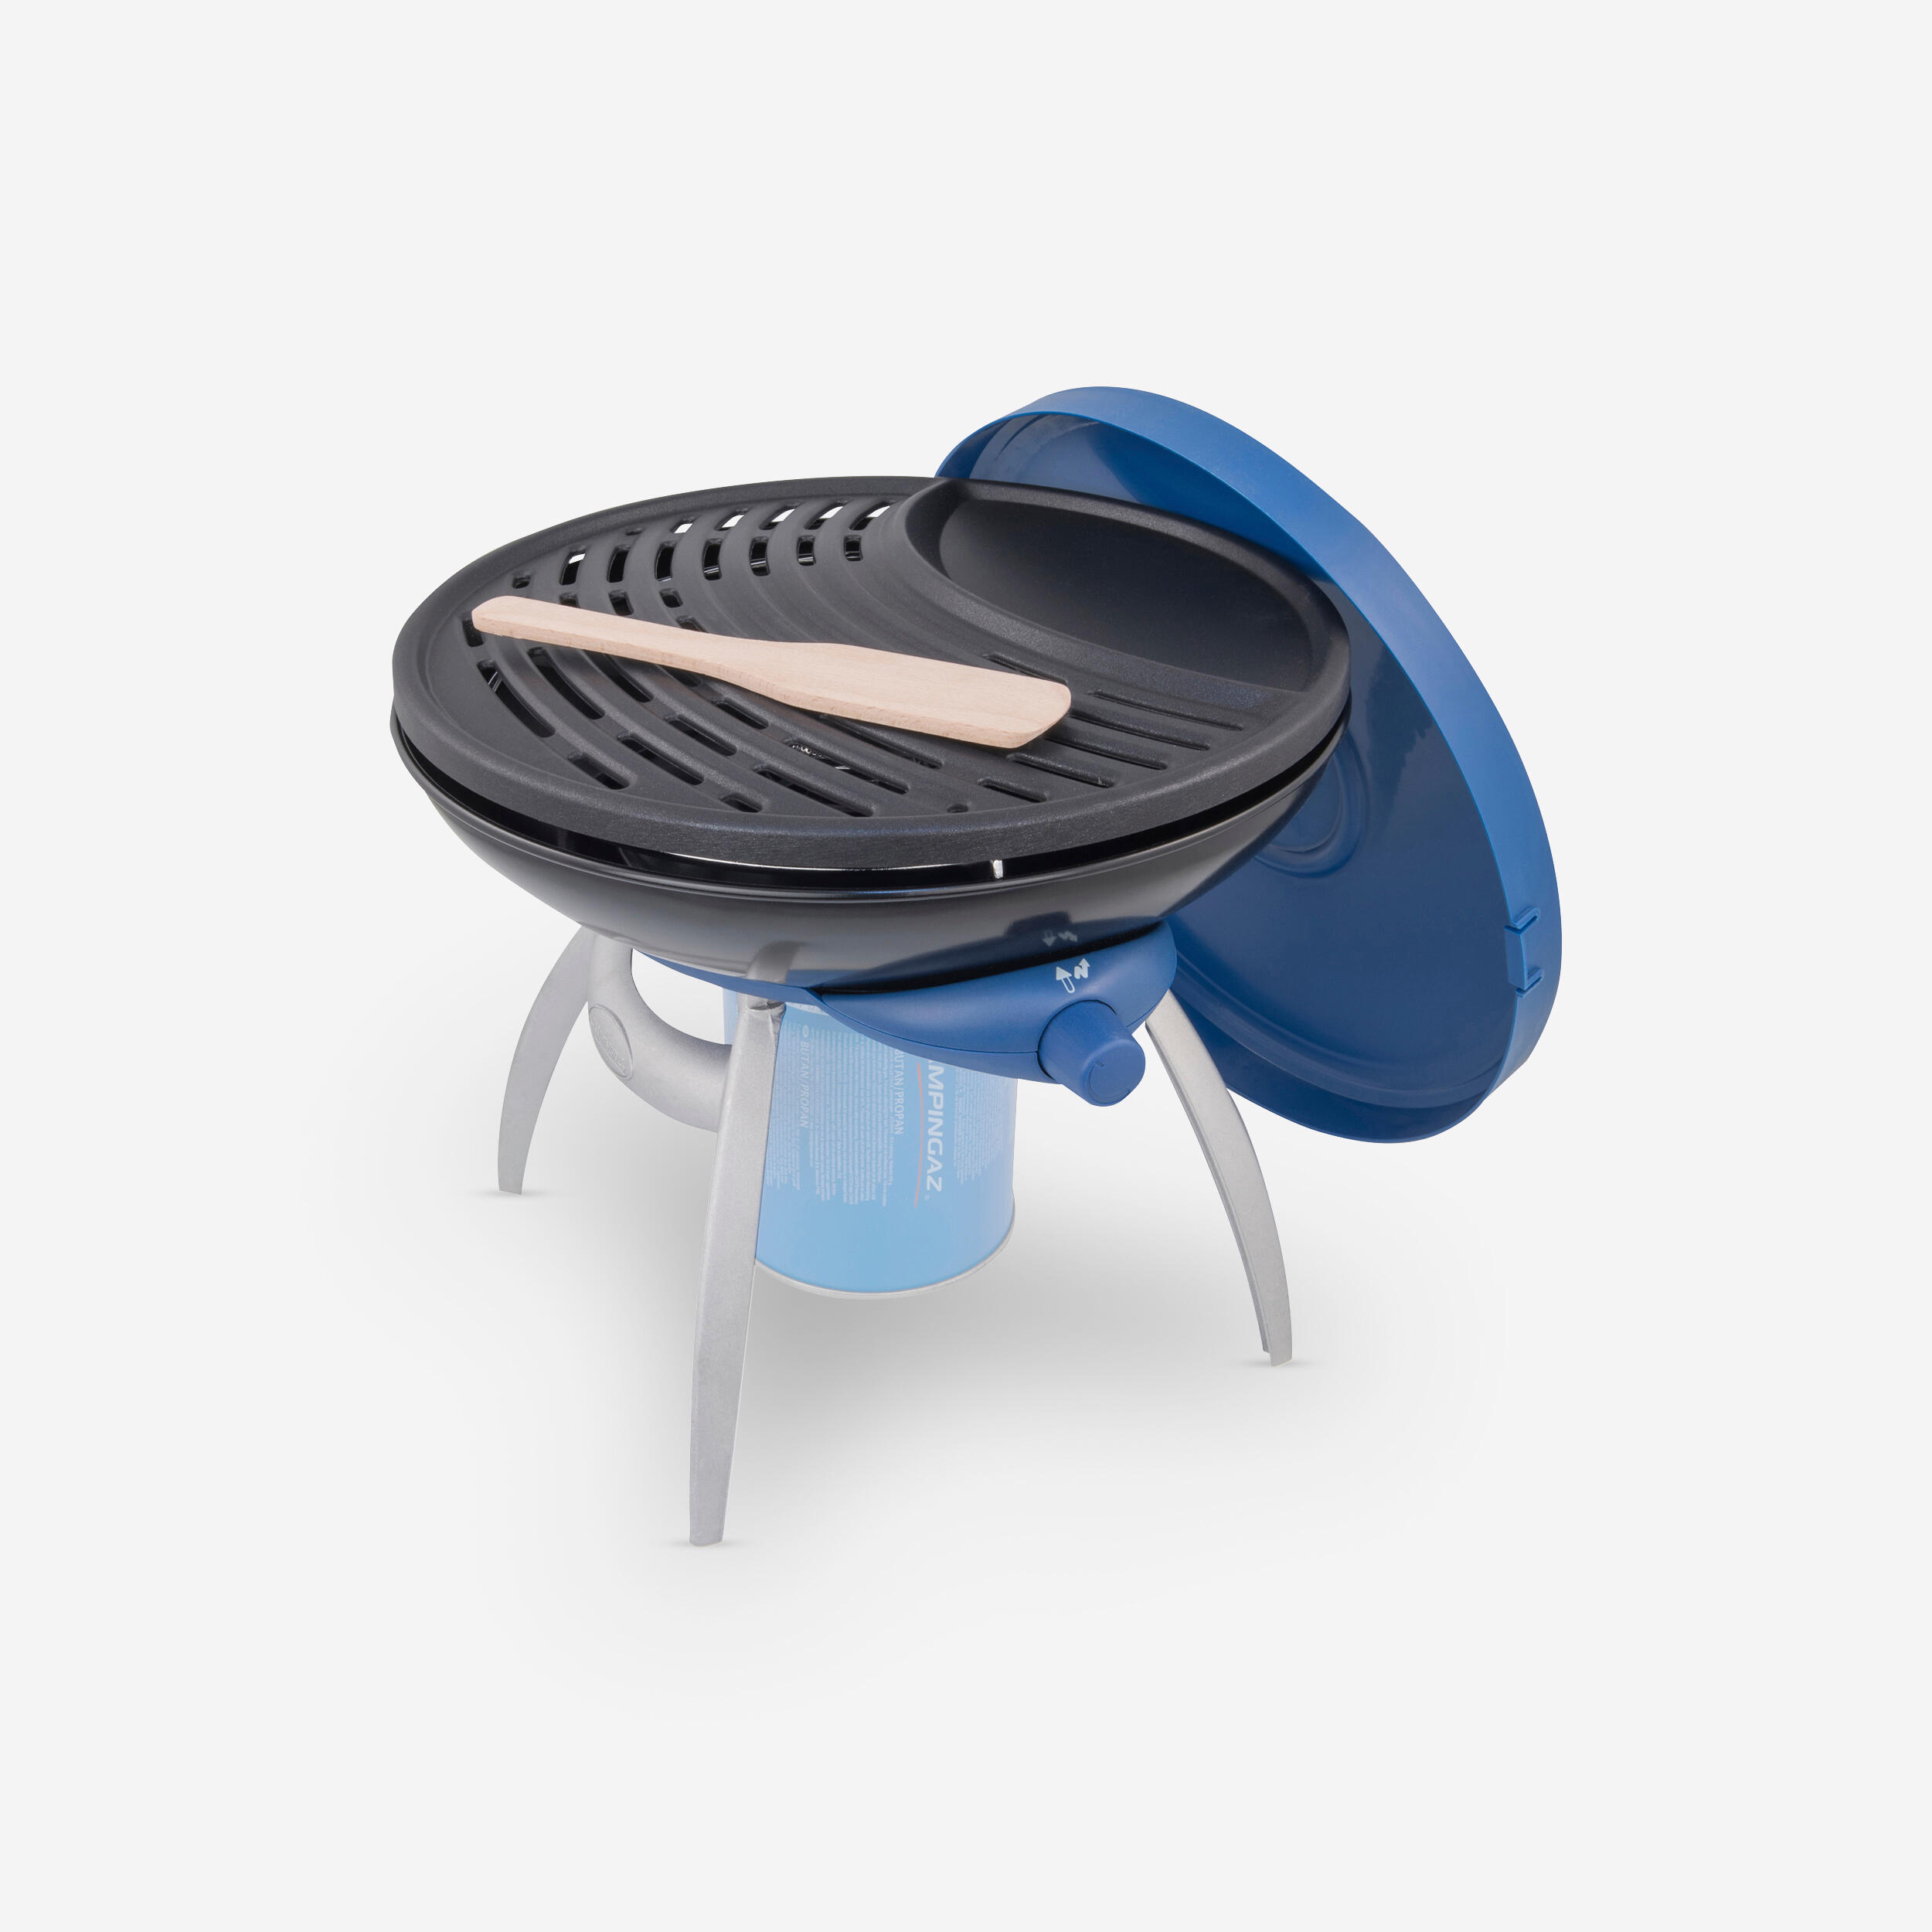 Grill Camping Party Grill Aragaze imagine 2022